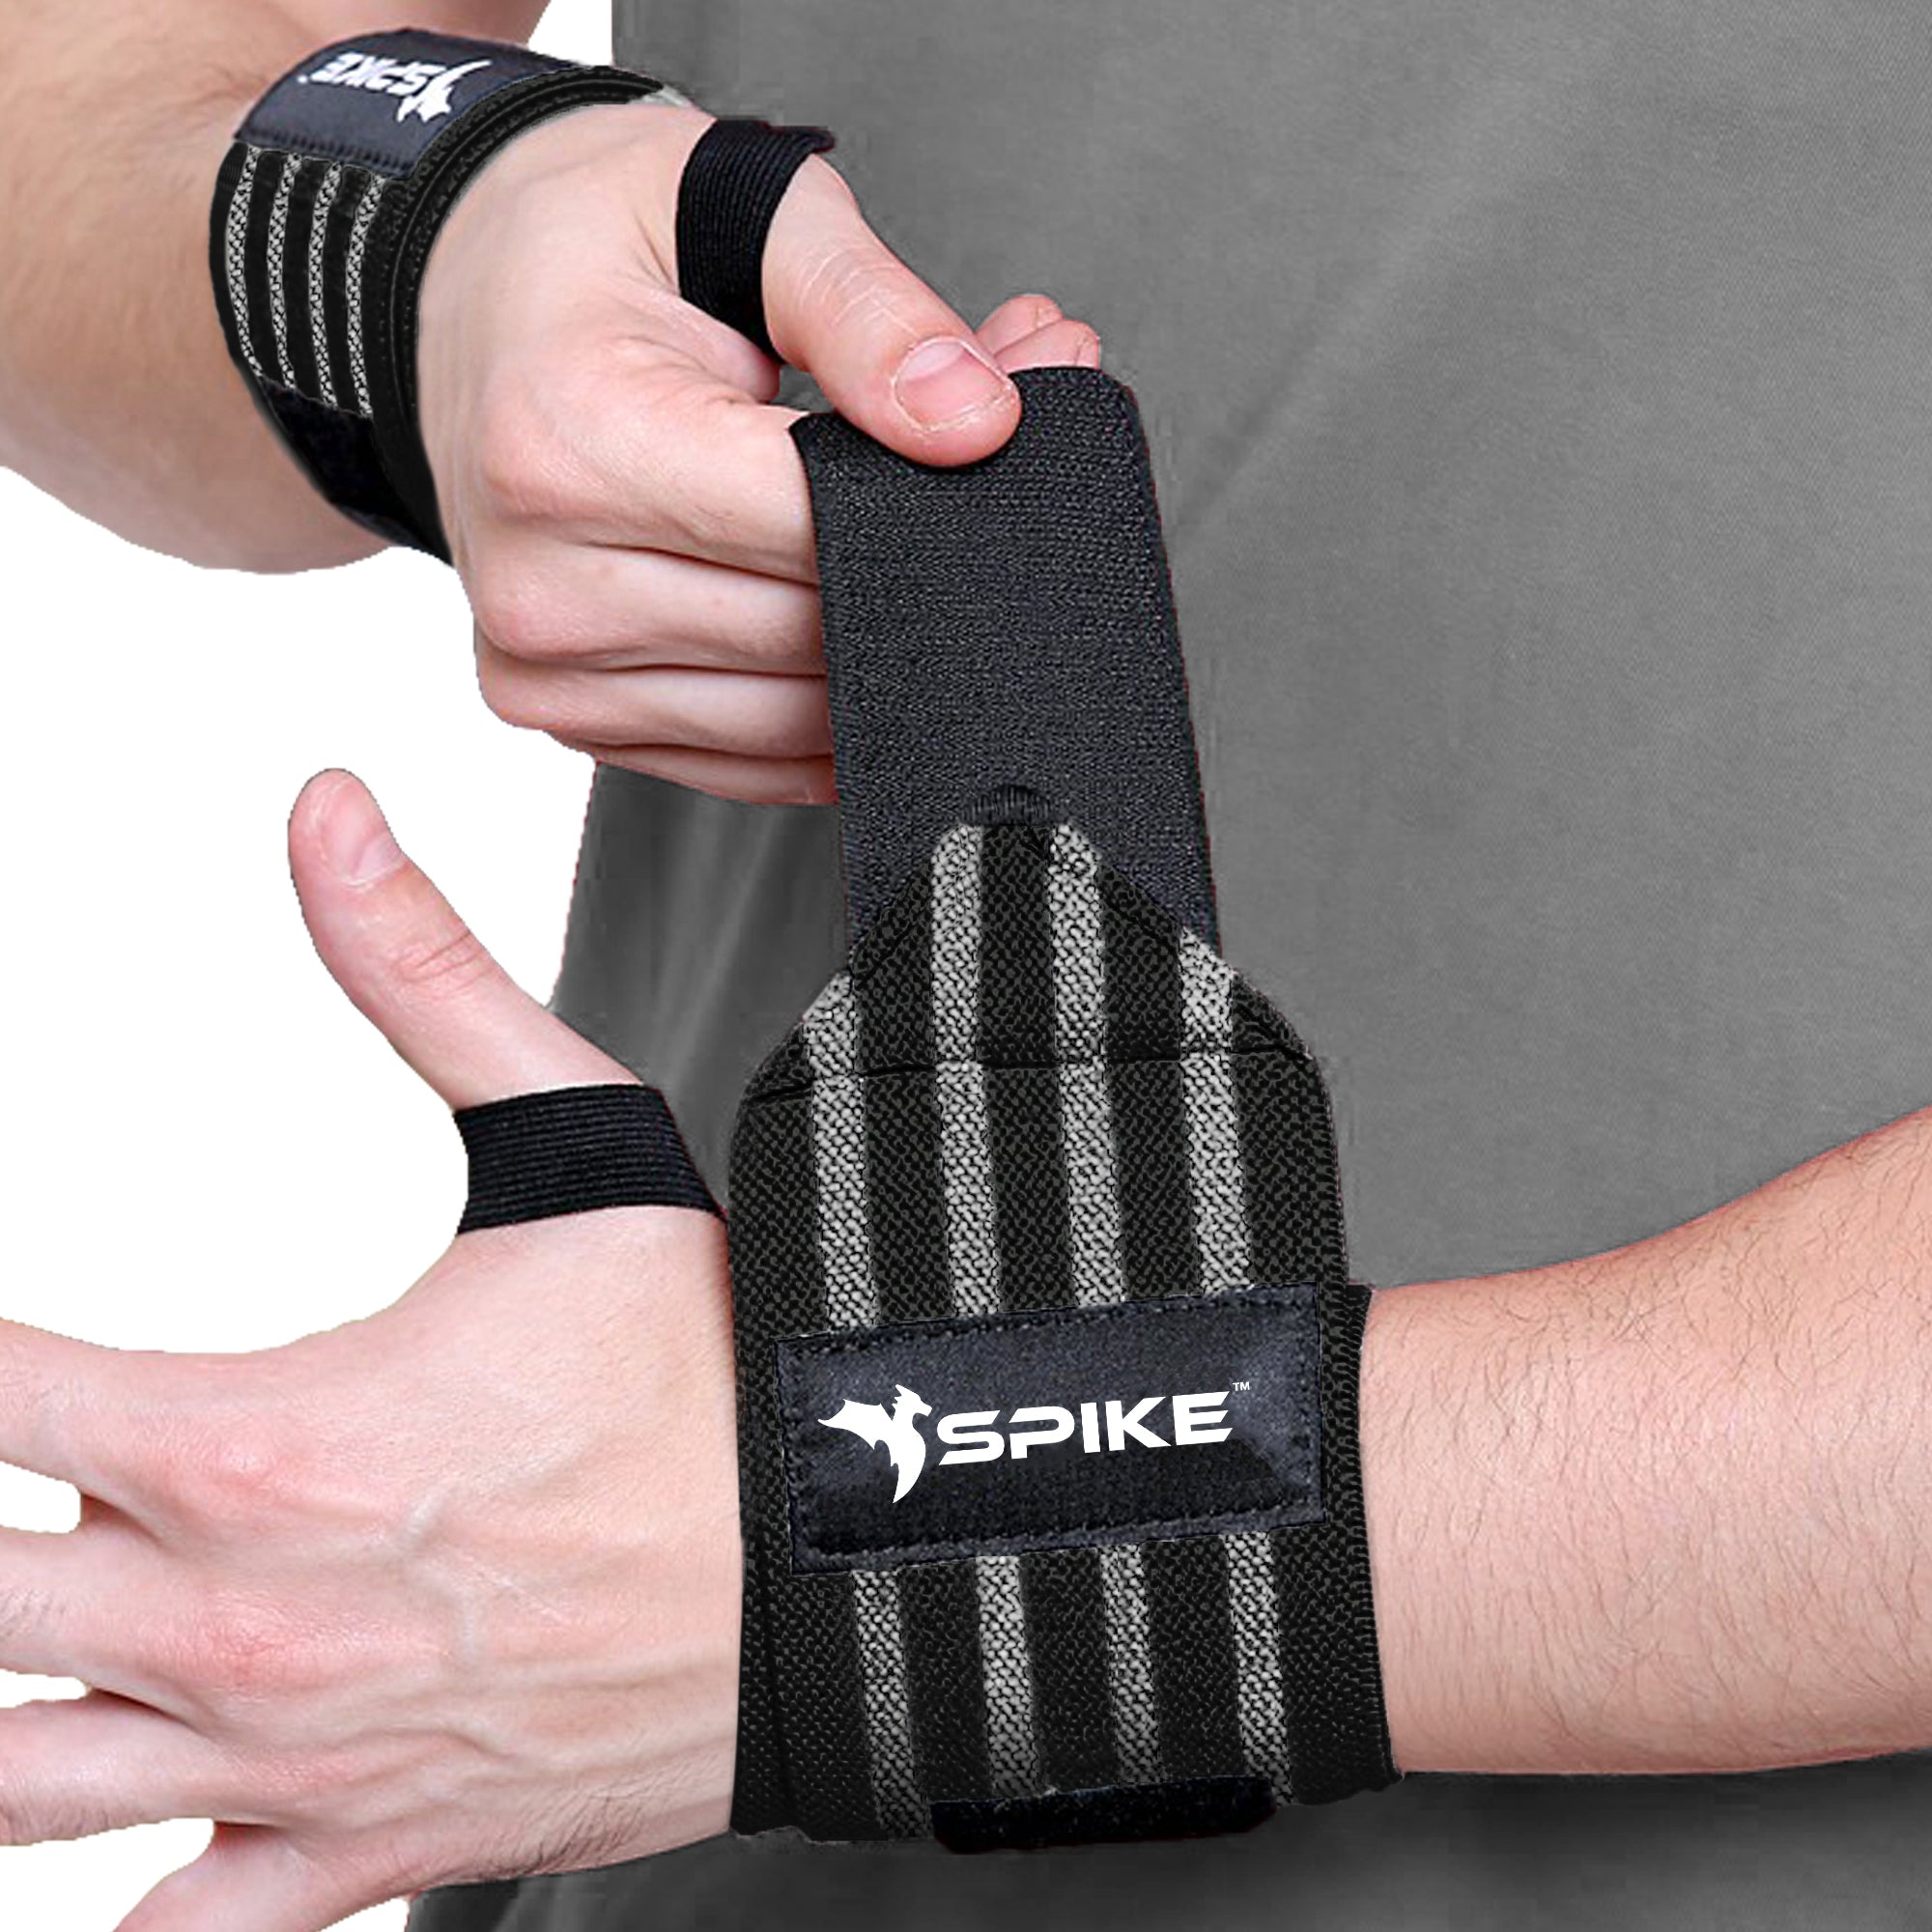 What is a Wrist Strap?